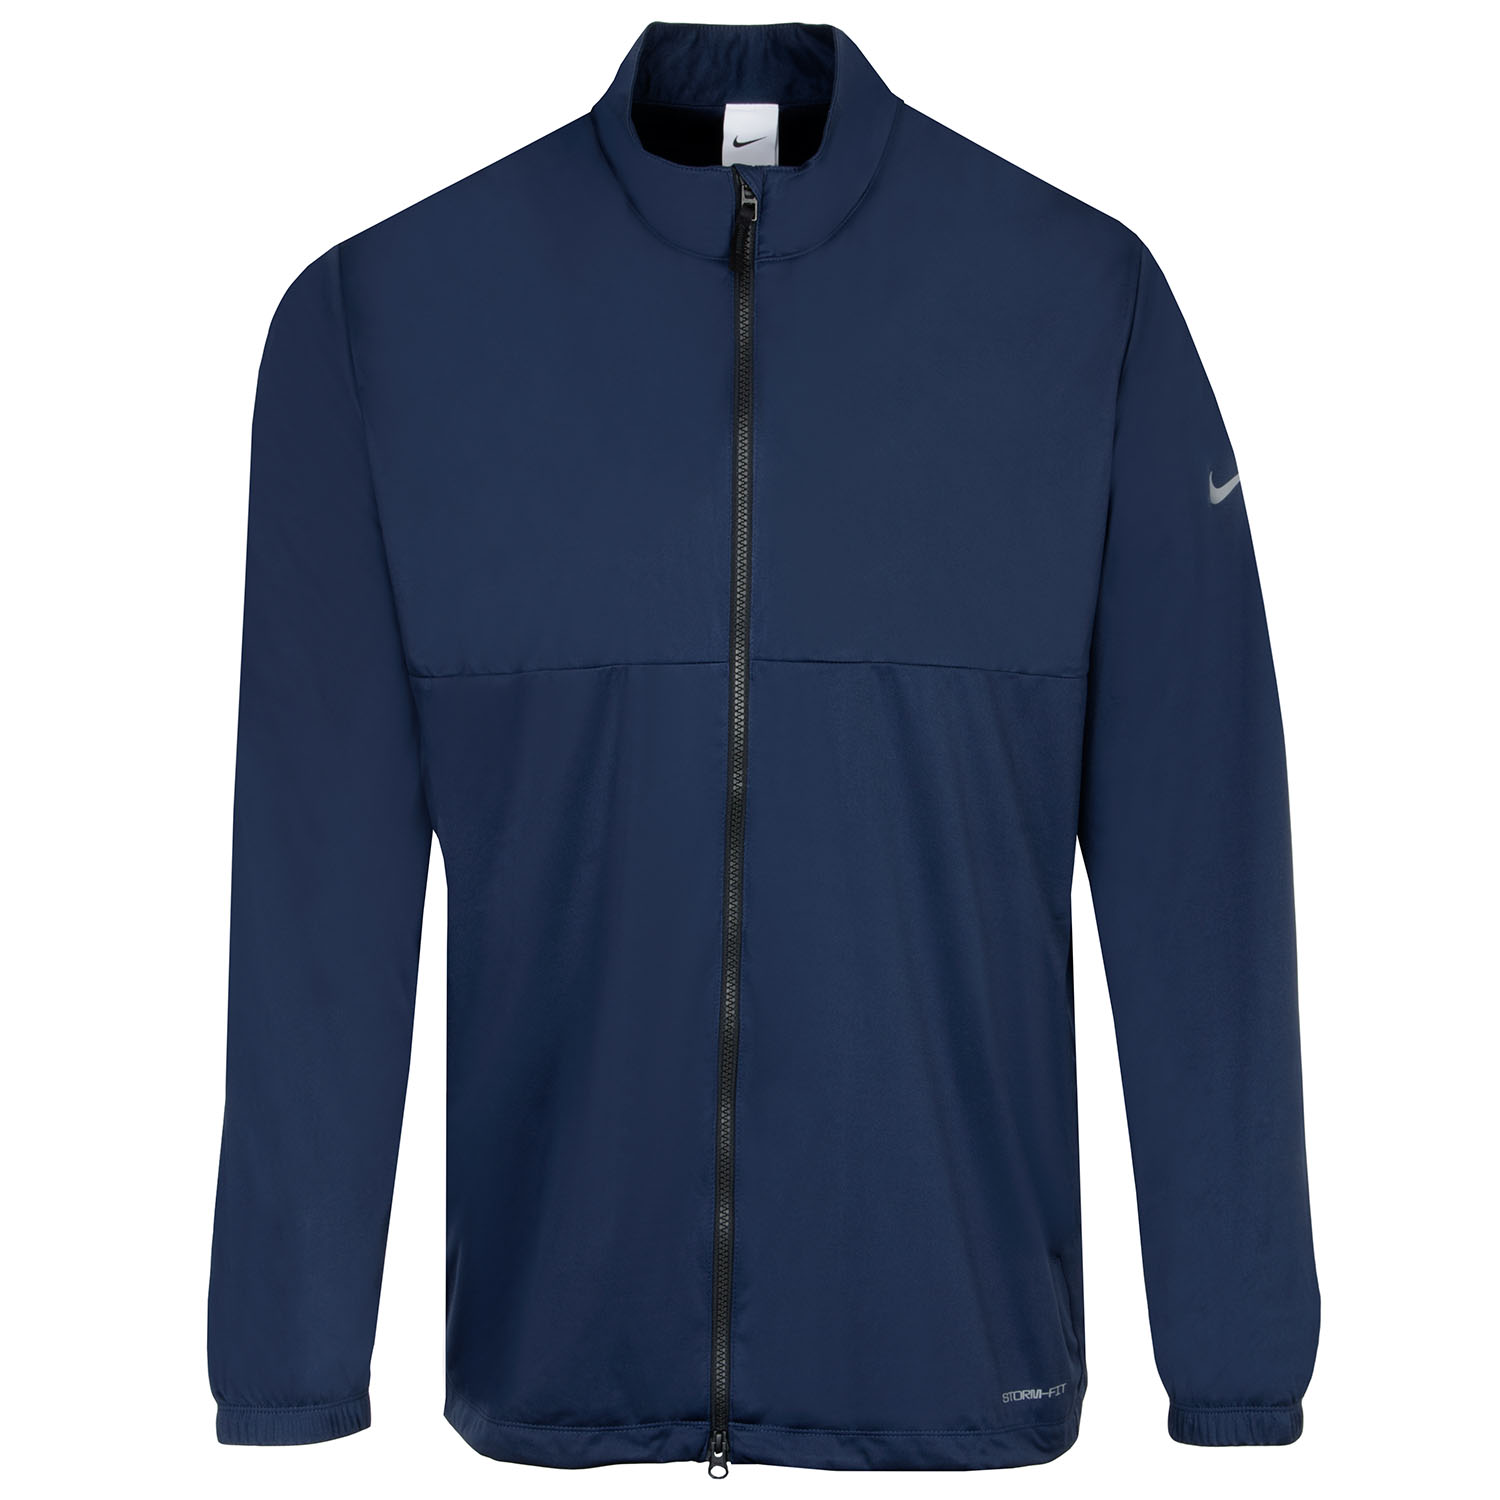 Nike Storm-FIT Victory Windproof Golf Jacket